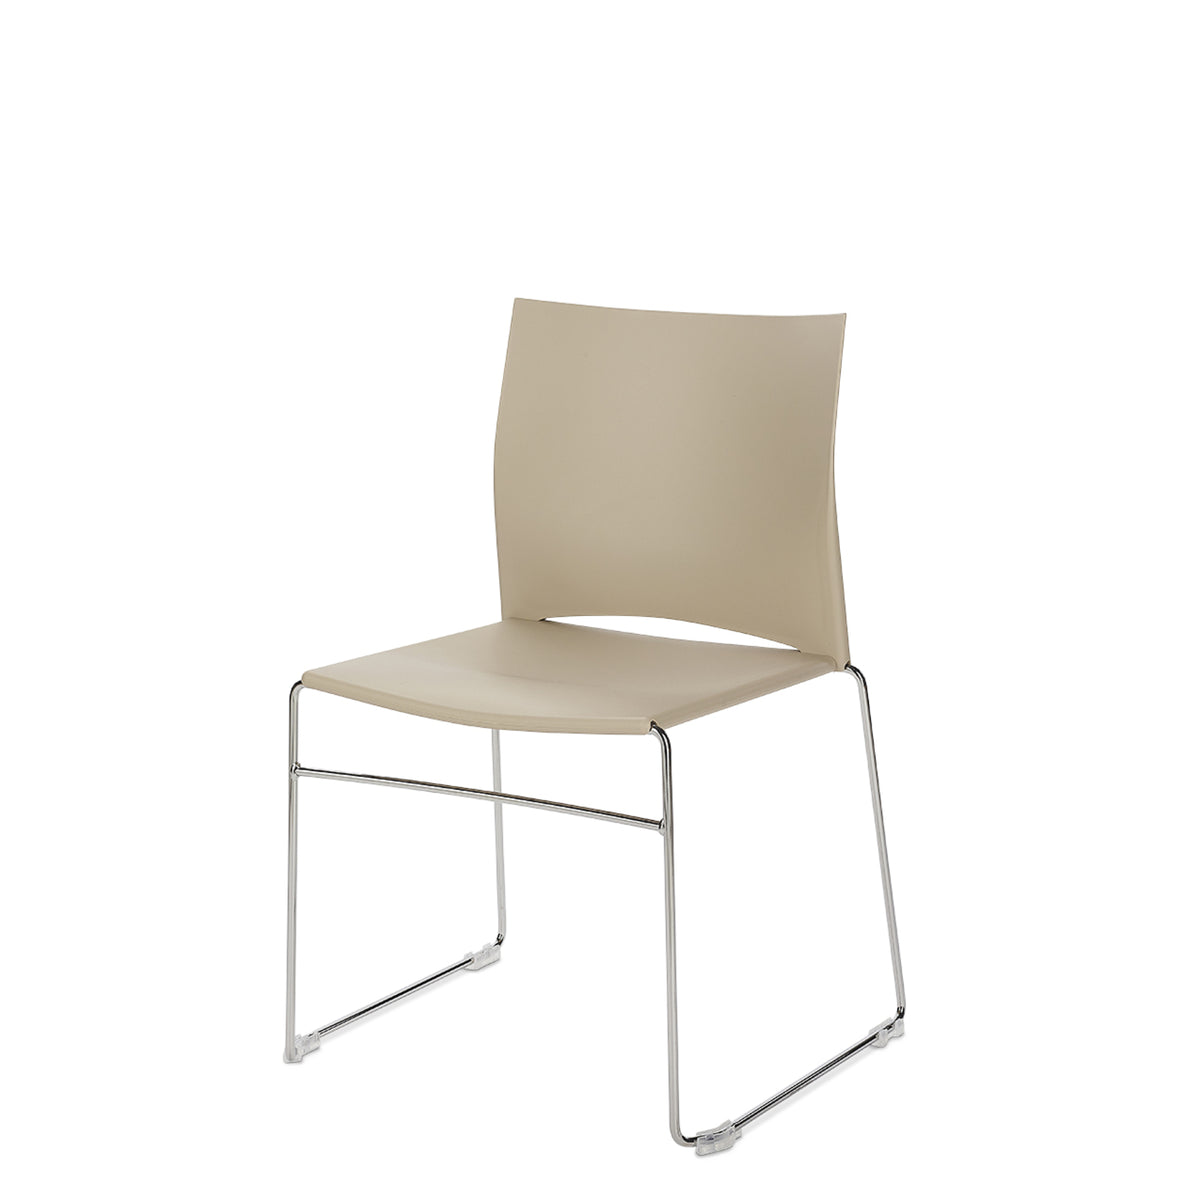 Connection Office Sandstone Xpresso Stackable Chairs - Set of Four